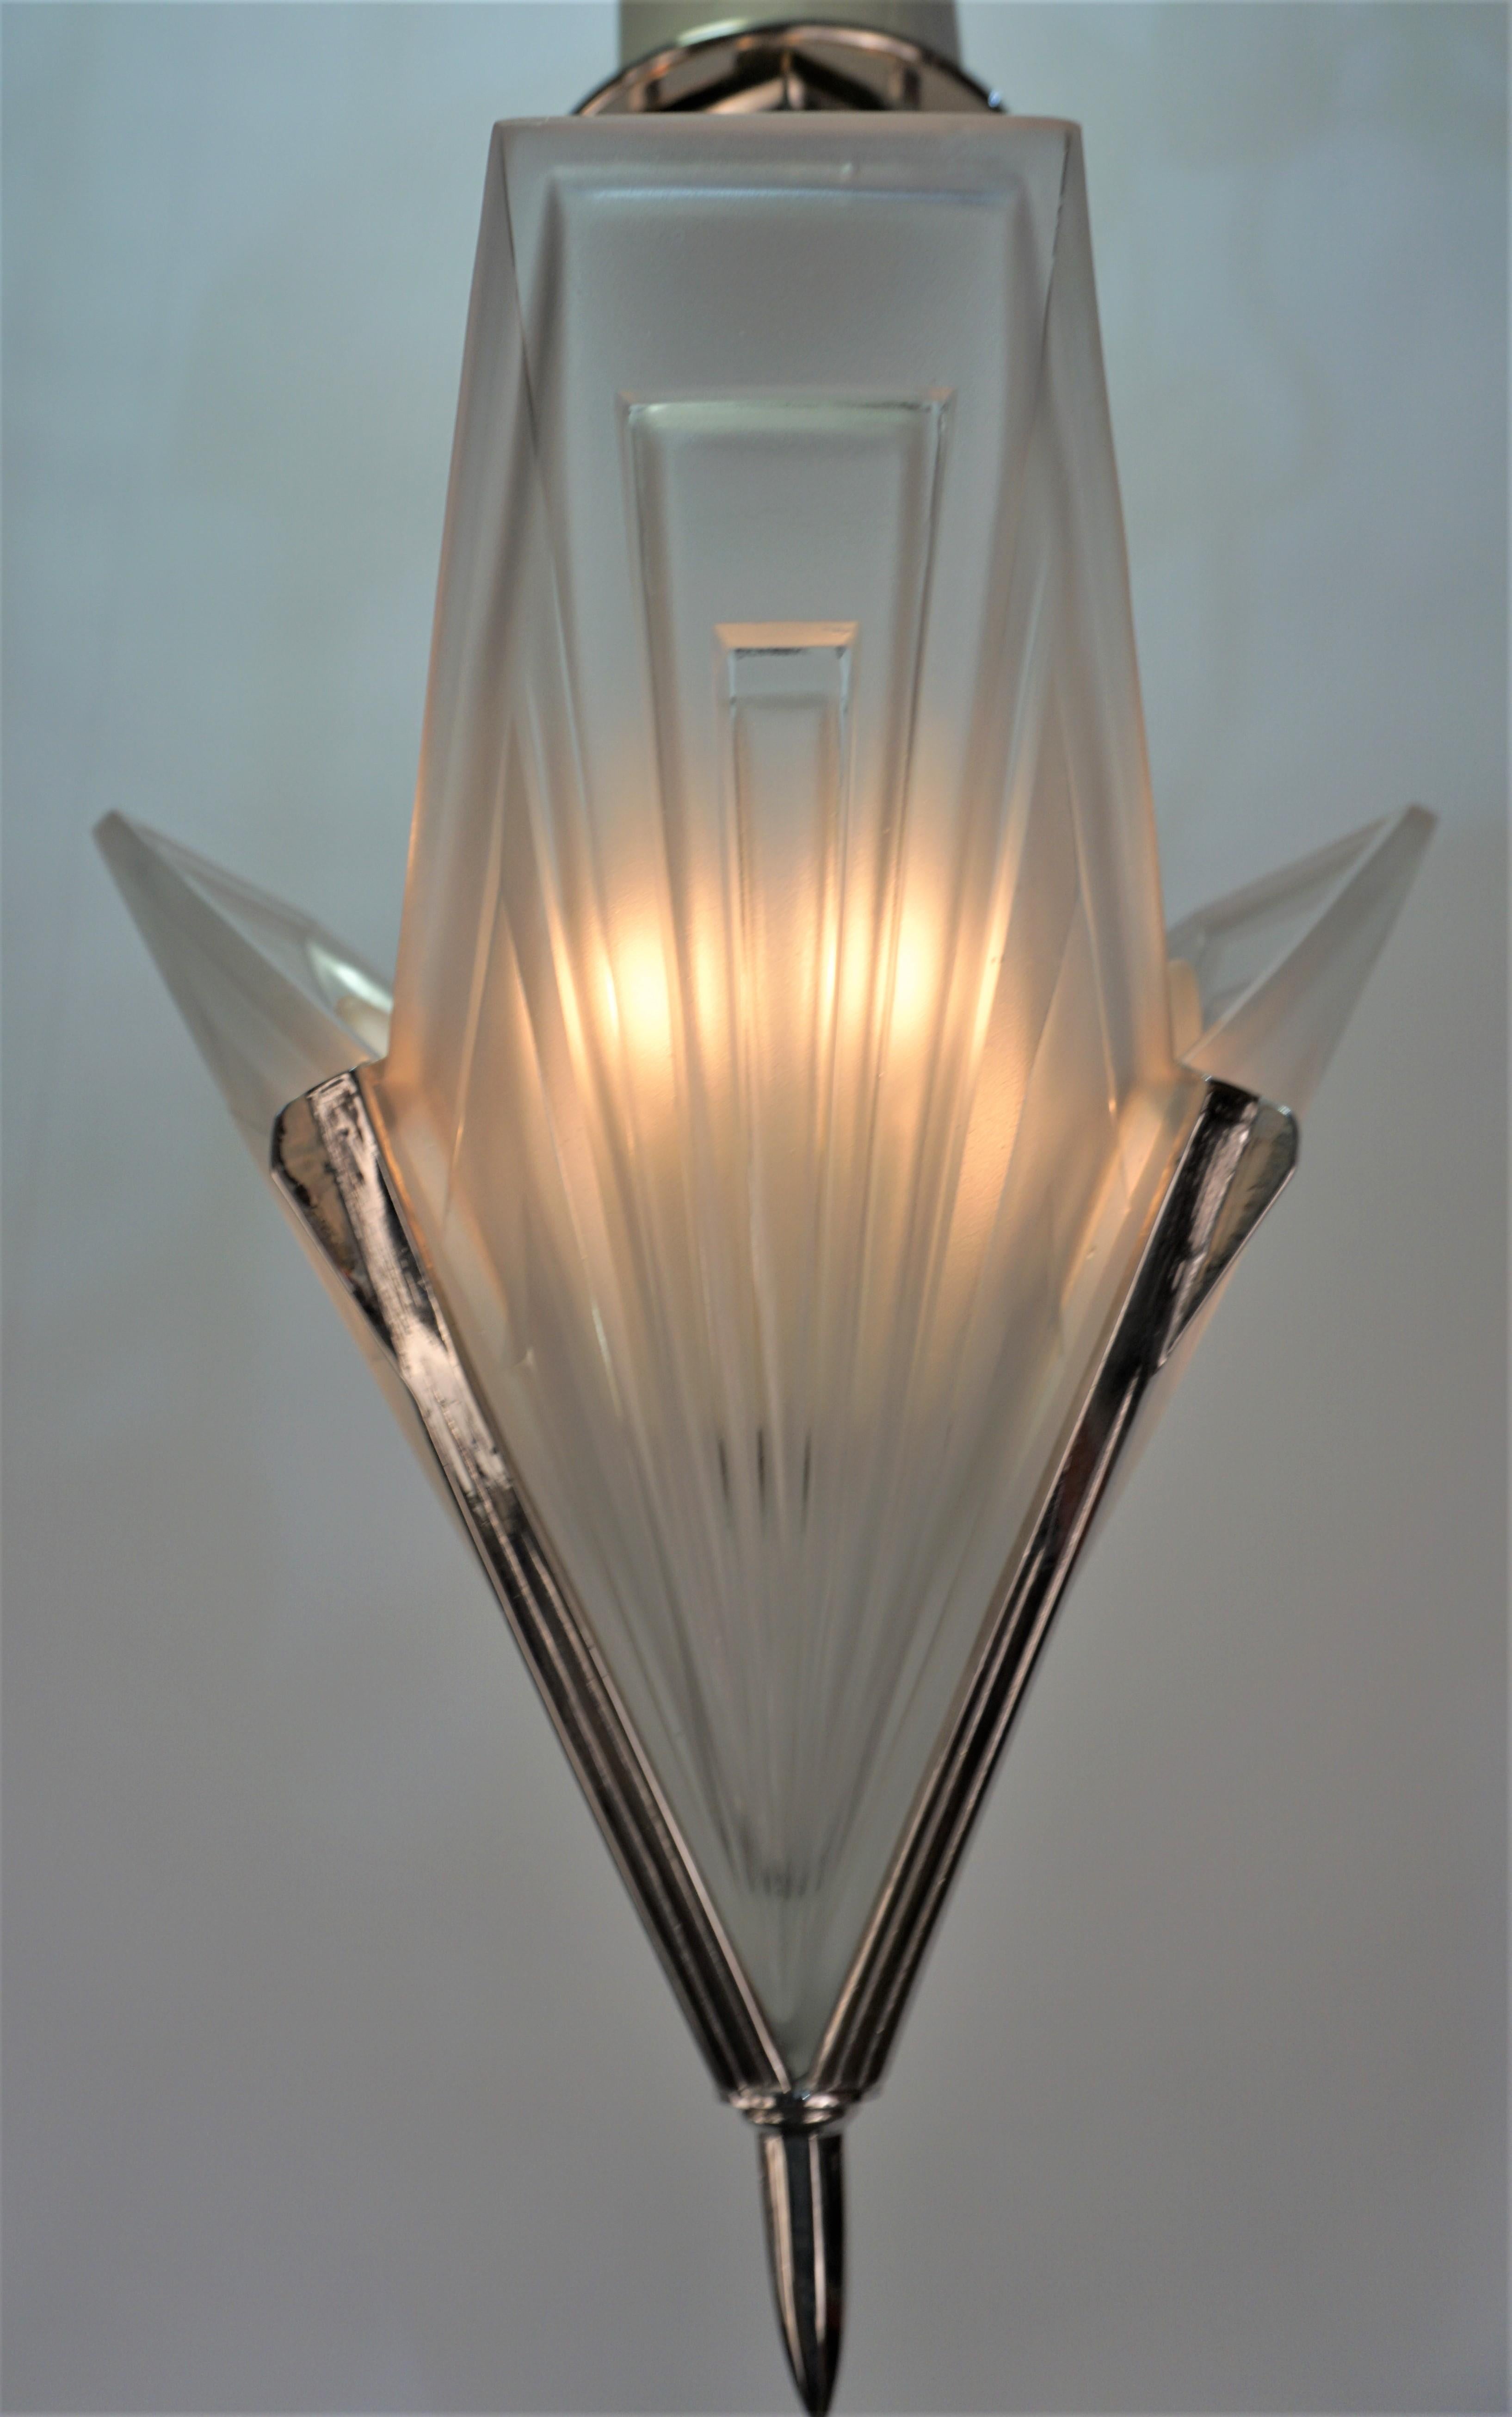 Clear frost glass with nickel on bronze frame art deco chandelier.
Six lights 60 watts each.